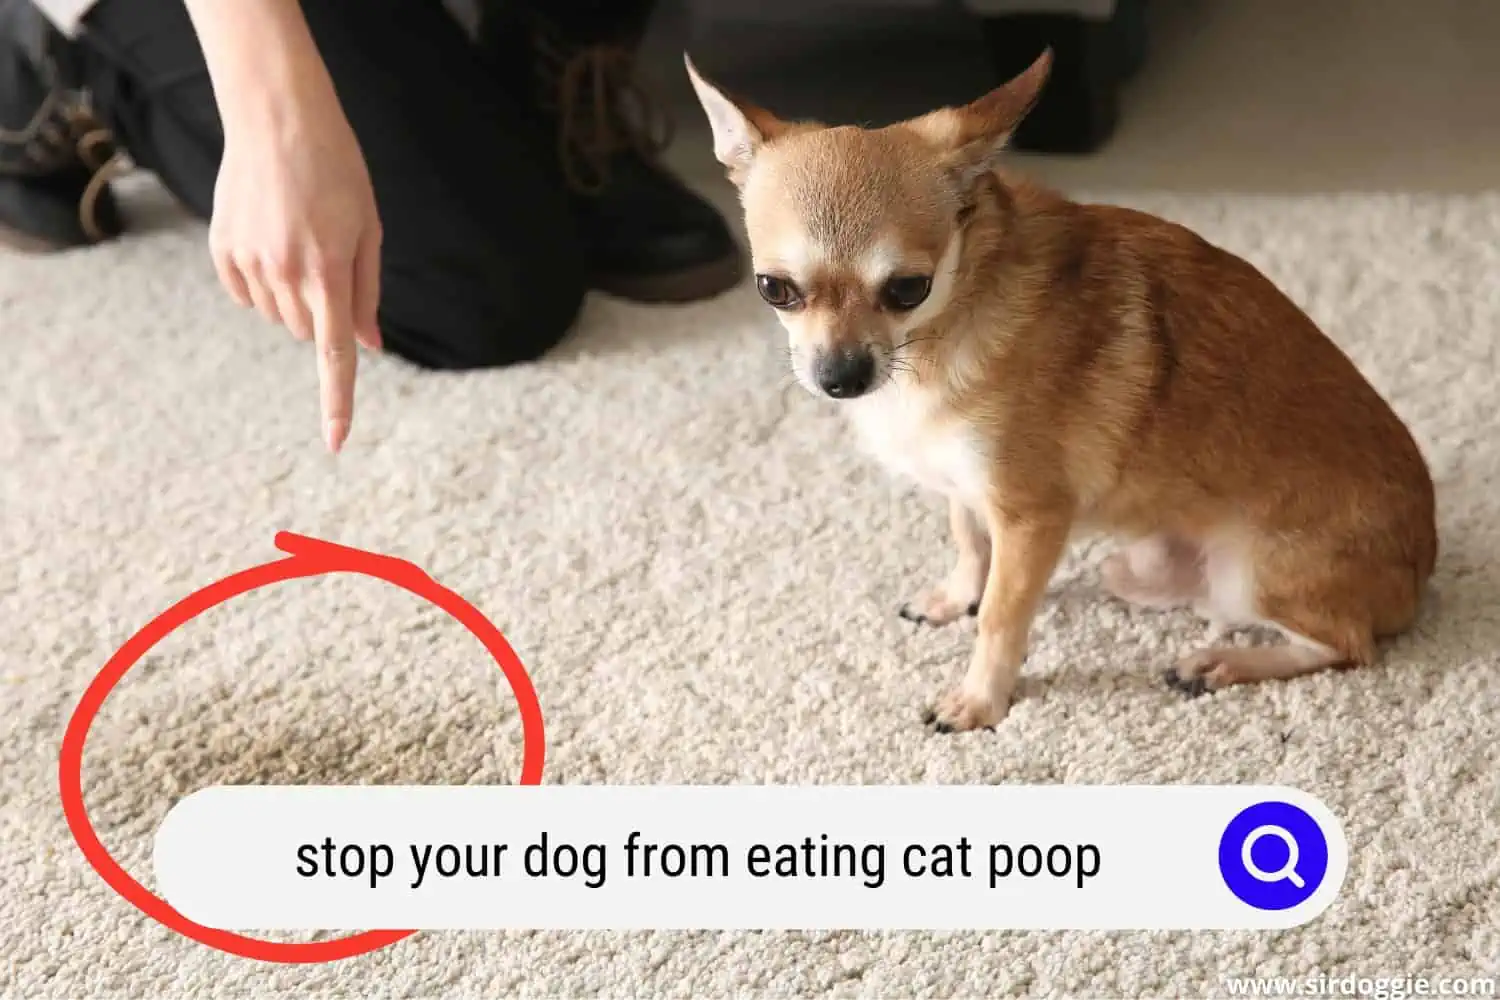 A pet owner scolding his dog for eating cat poop